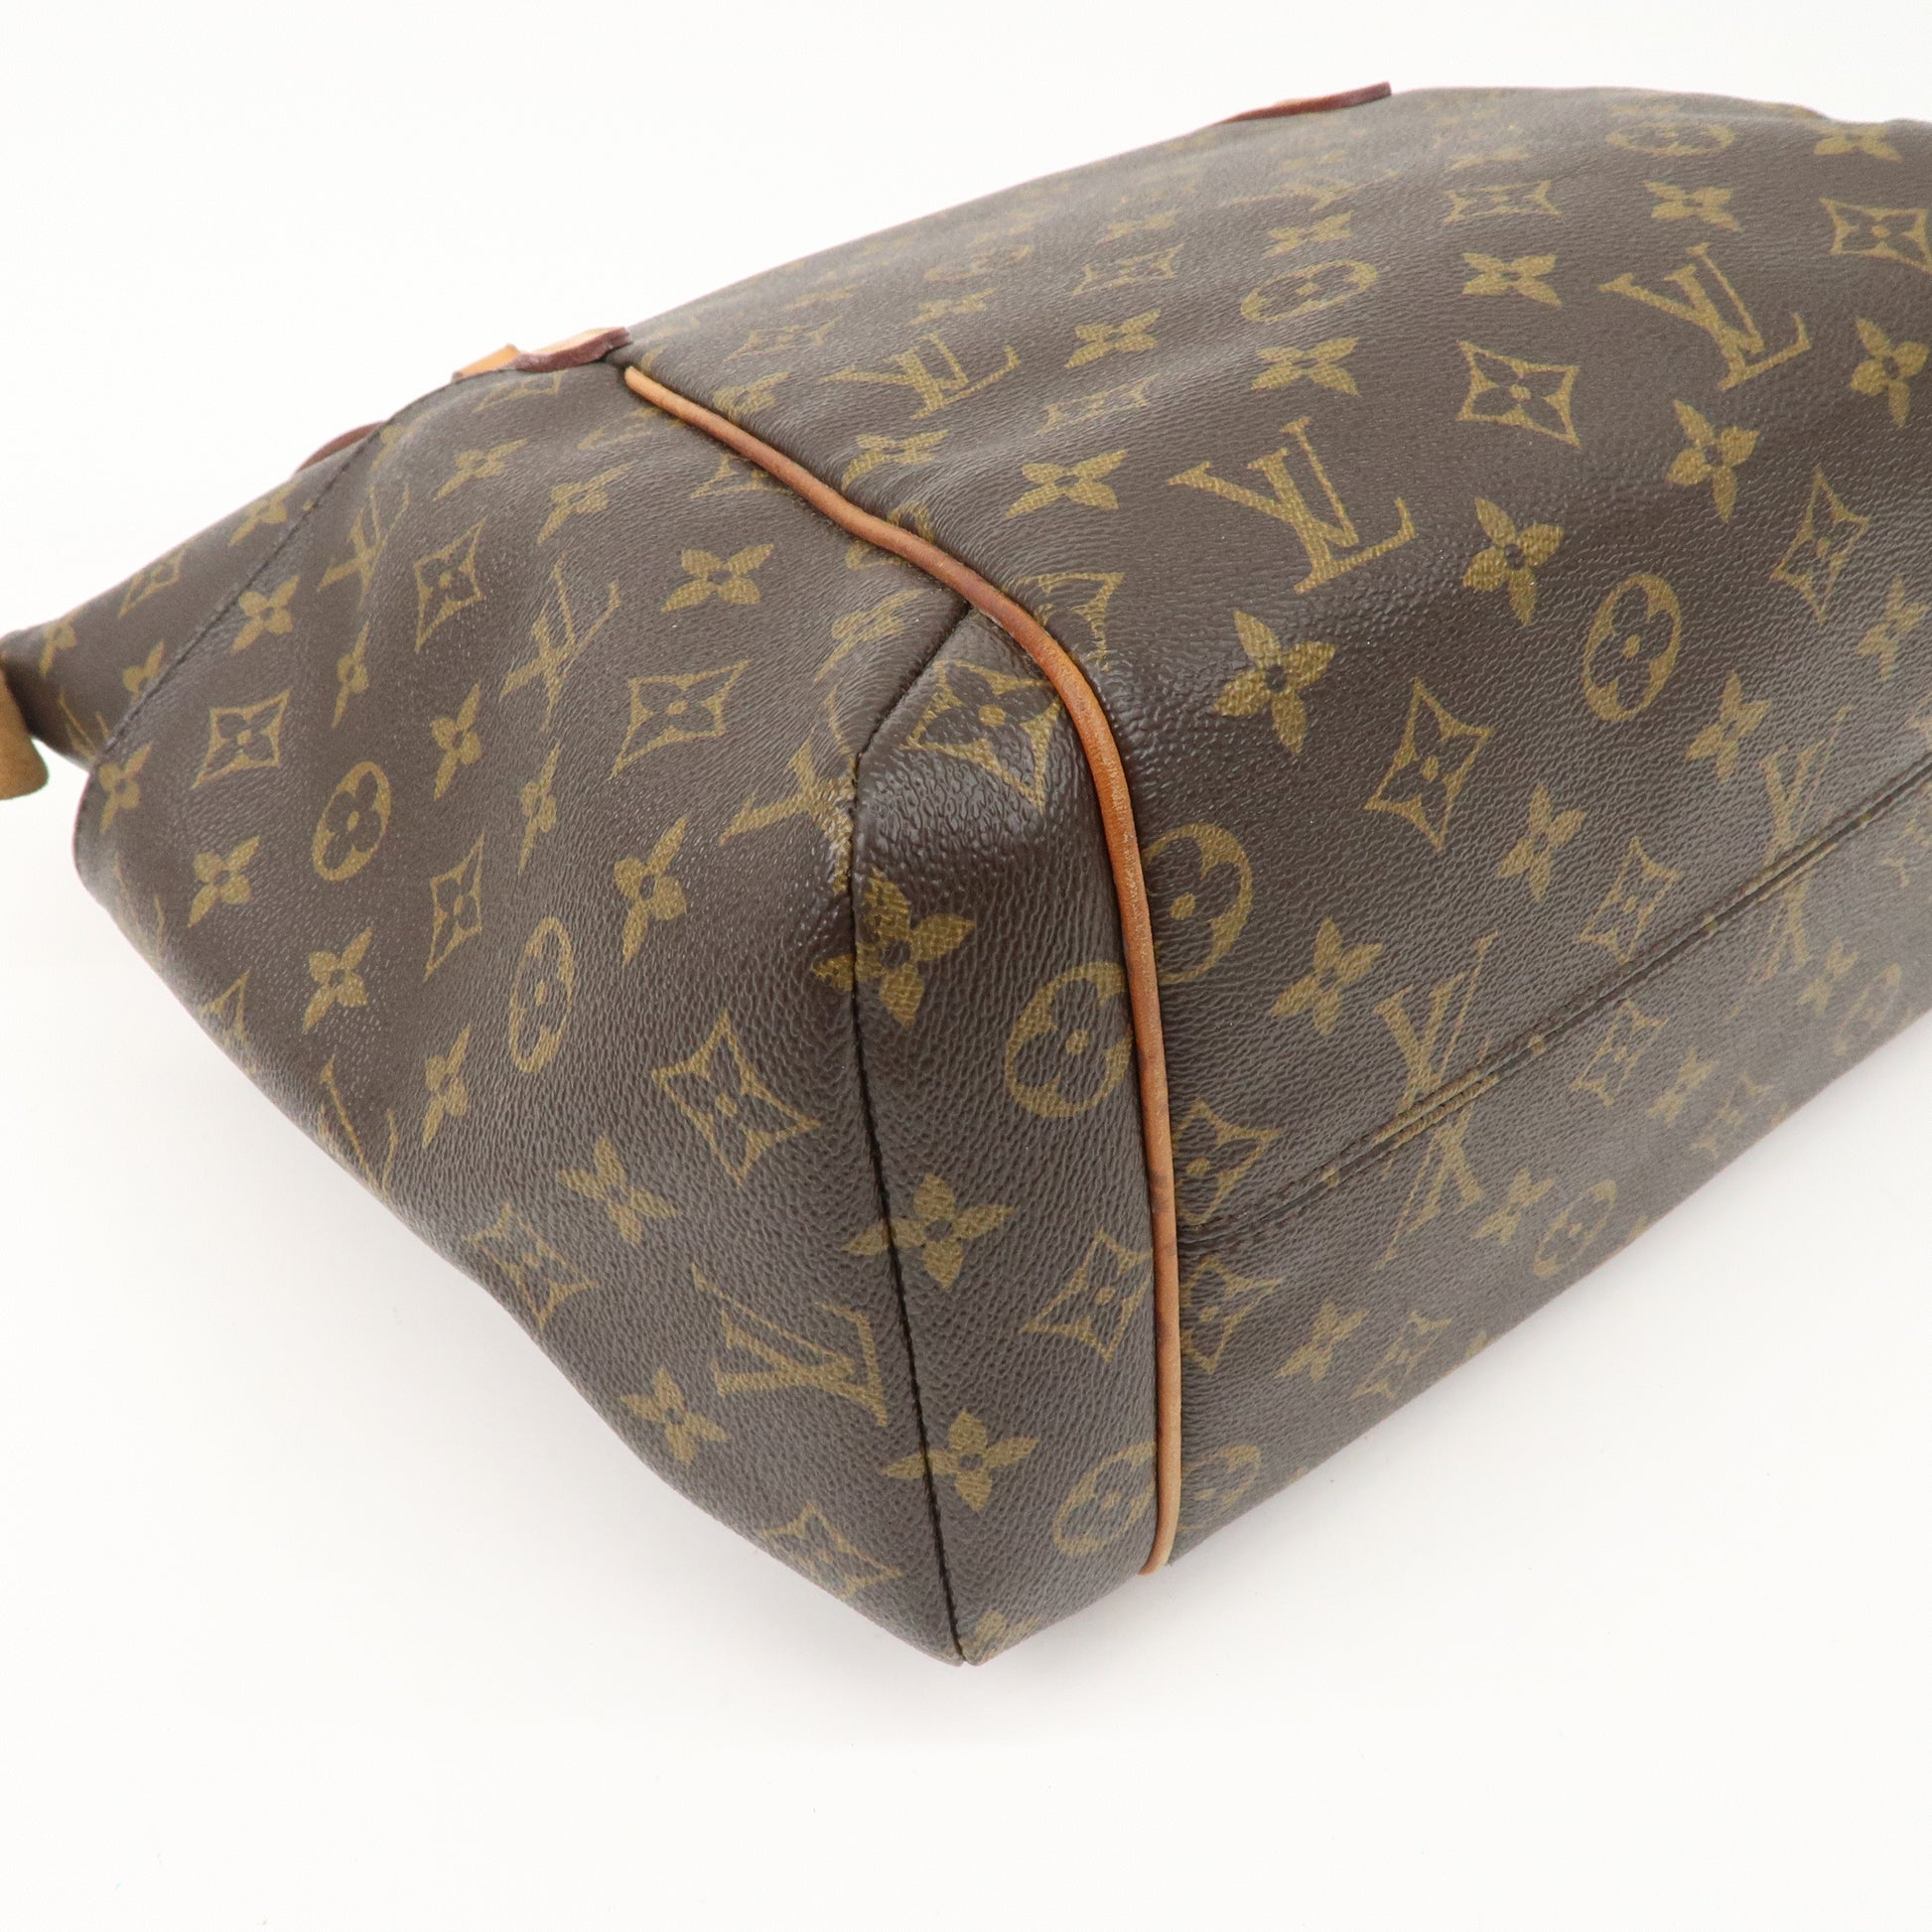 Louis-Vuitton-Monogram-Totally-MM-Tote-Bag-M41015 – dct-ep_vintage